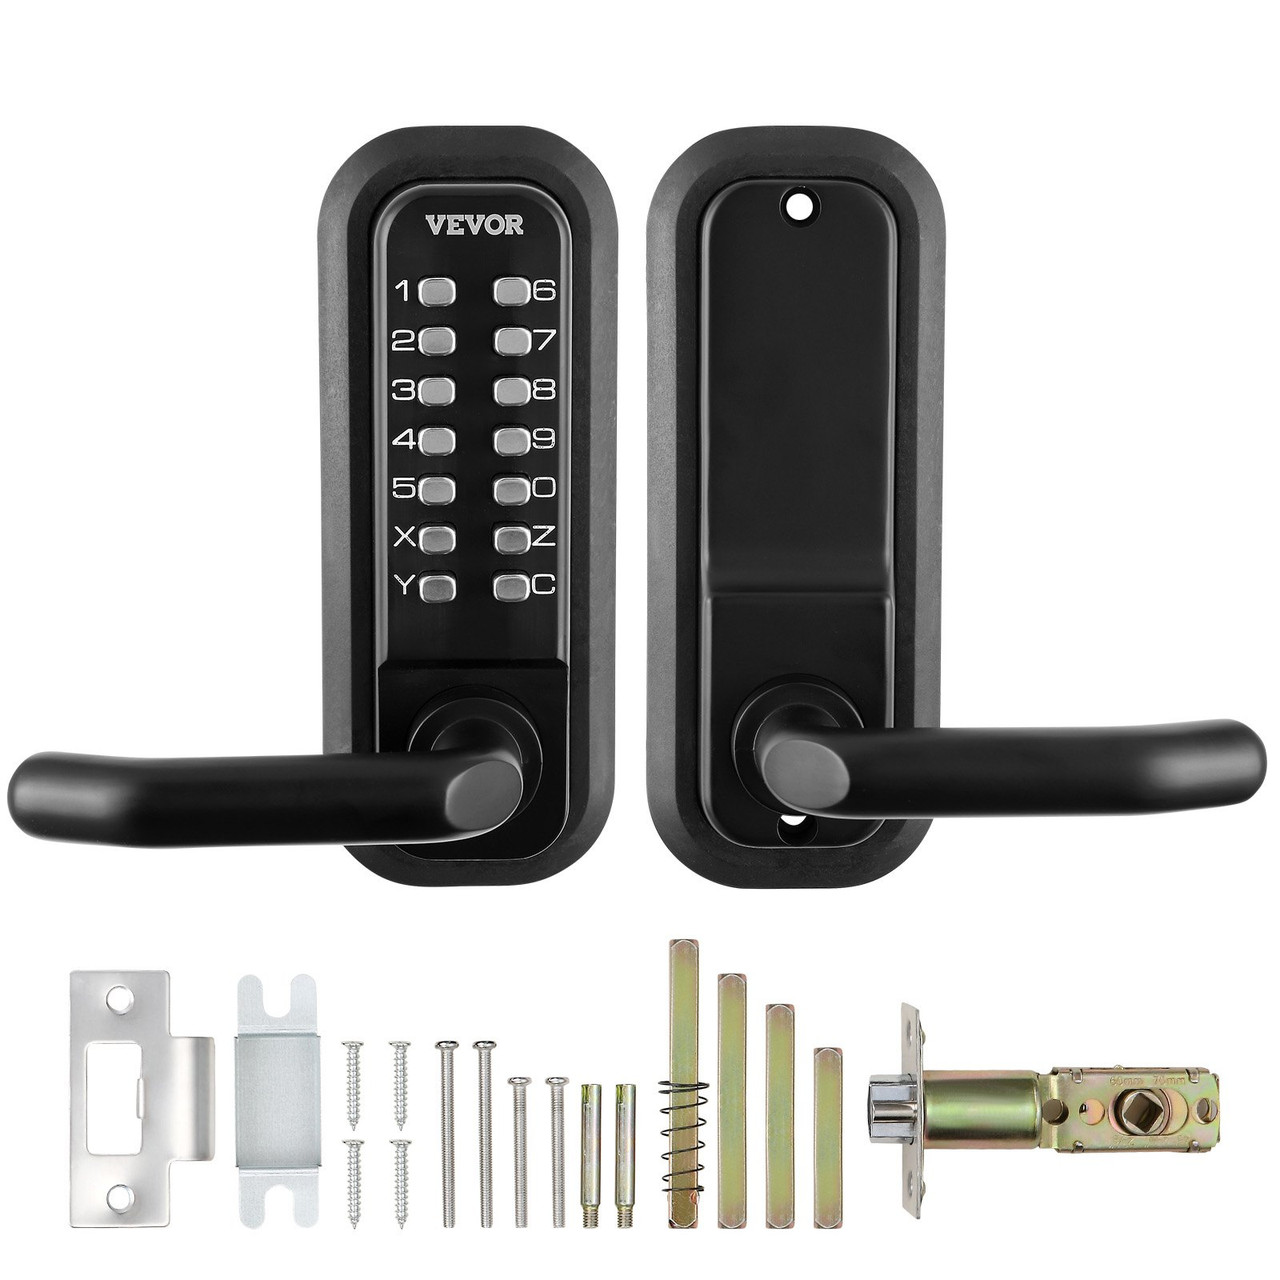 VEVOR Mechanical Keyless Entry Door Lock, 14 Digit Keypad, Embedded Outdoor Gate Door Locks Set with Keypad and Handle, Water-proof Zinc Alloy, Easy to Install, for Garden, Garage, Yard, Storage Shed